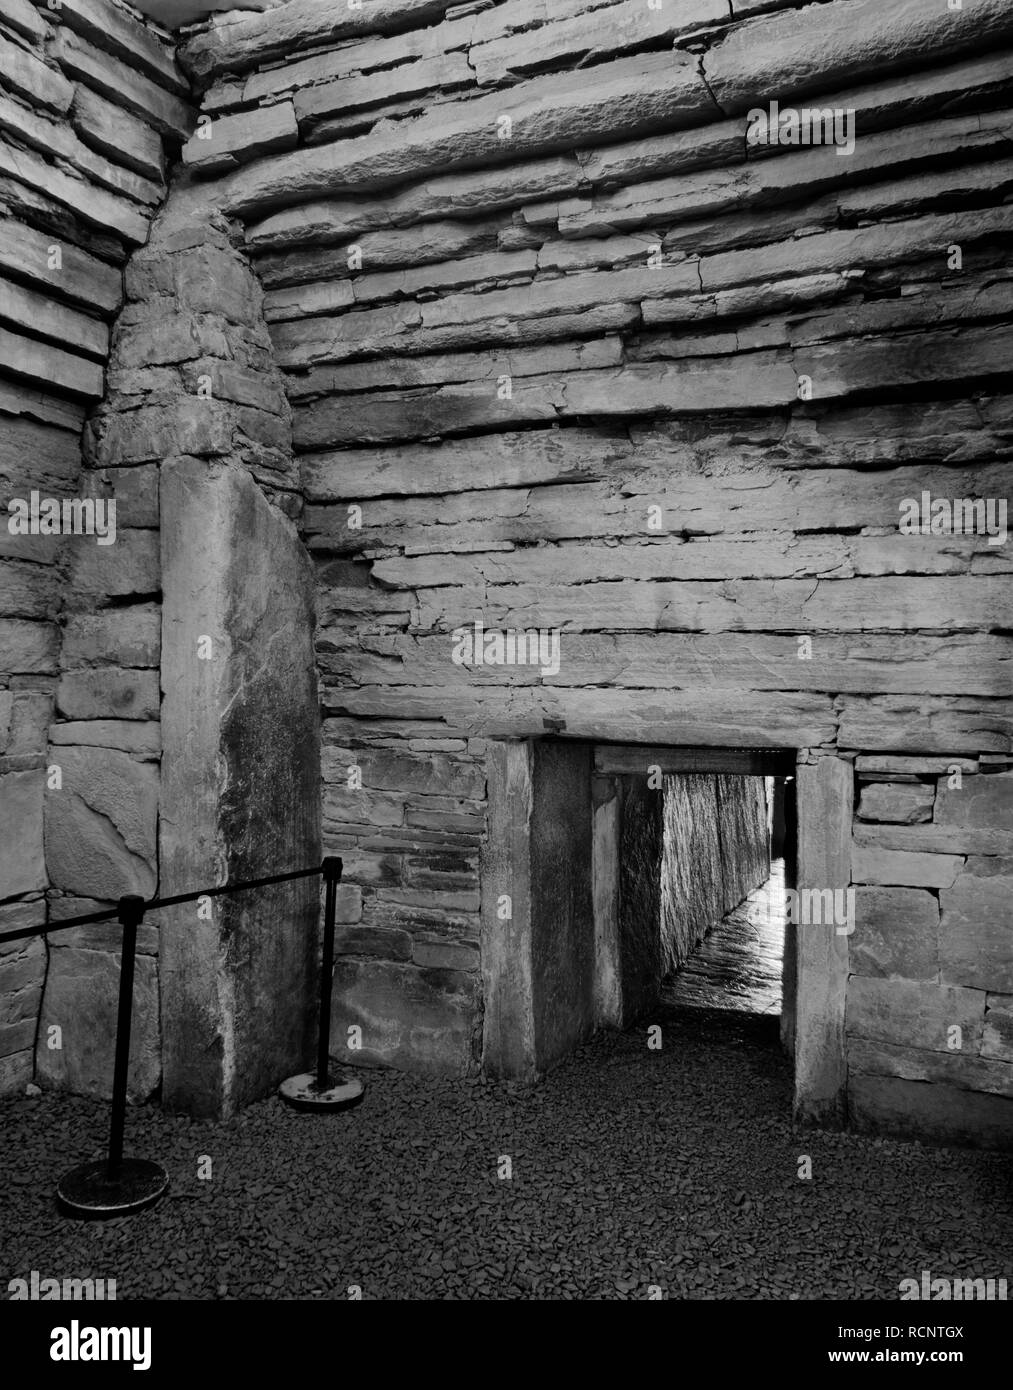 Interior view of central chamber of Maes Howe Neolithic chambered cairn, Orkney, Scotland, UK, showing inner entrance passage & south corner buttress. Stock Photo